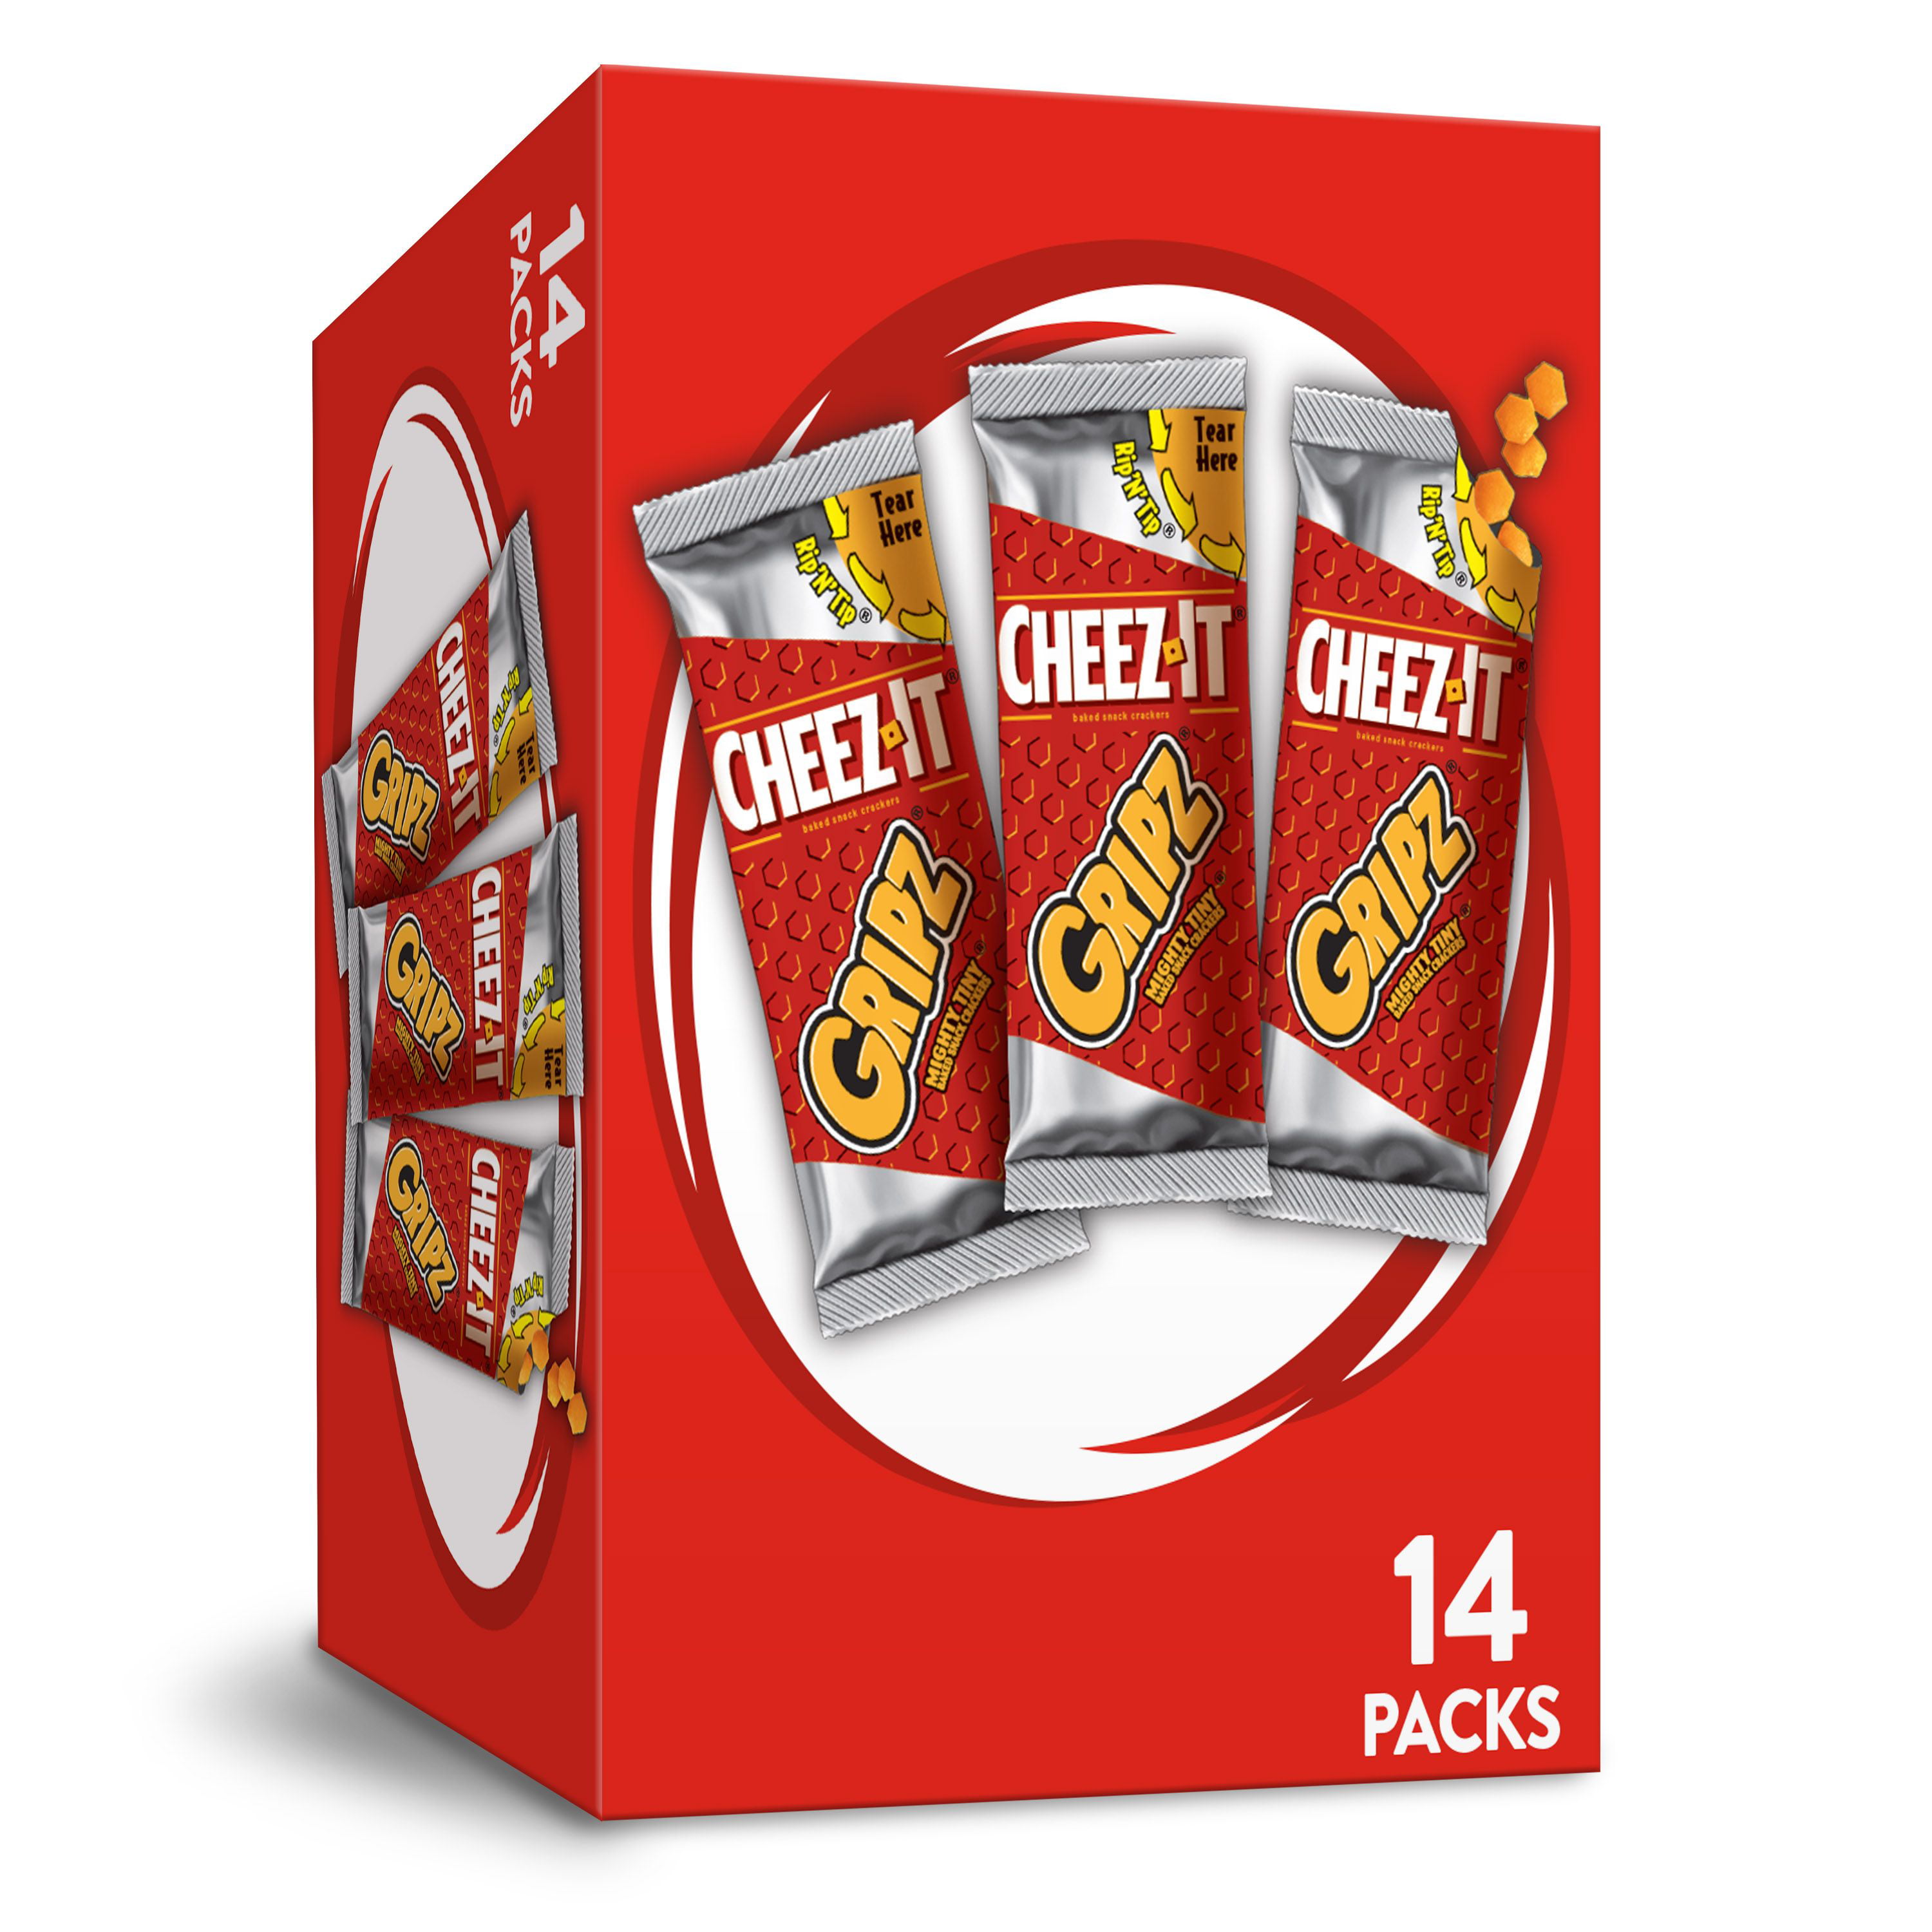 Cheez-It Gripz Tiny Cheese Crackers, Great for On-the-Go, Original, Ct, Oz, Box - Walmart.com